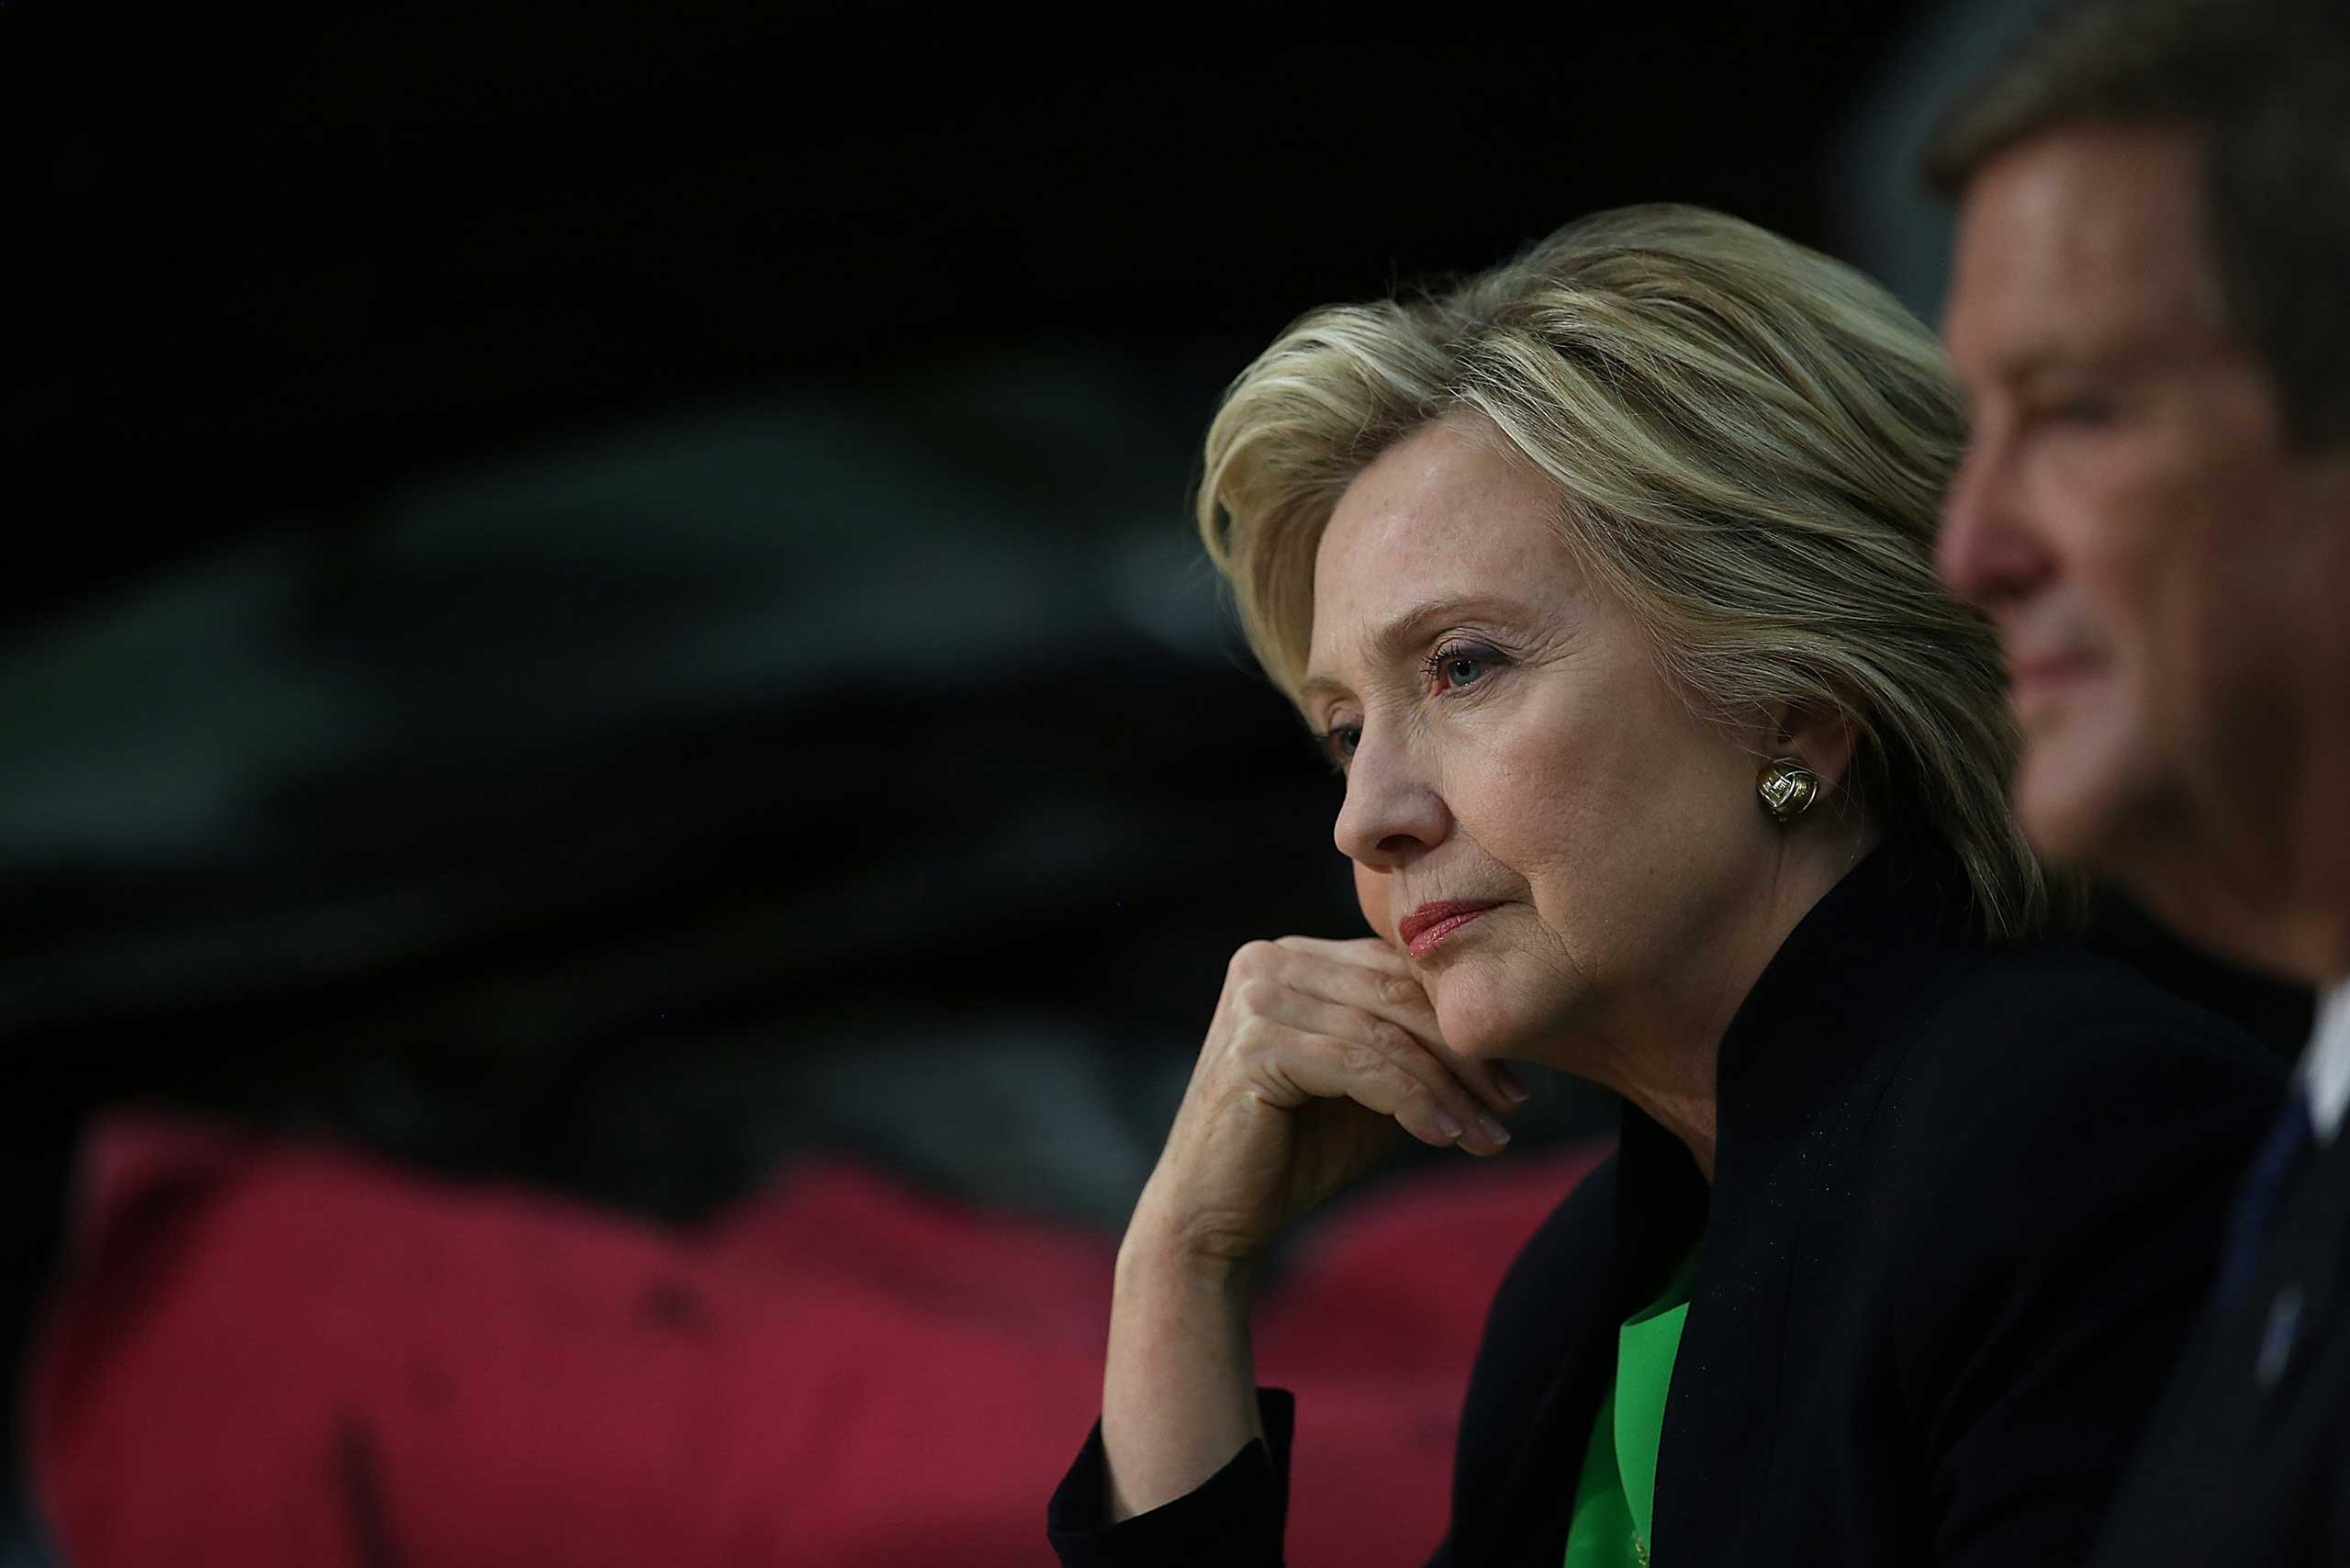 Democratic presidential hopeful and former Secretary of State Hillary Clinton looks on during a roundtable discussion with students and educators at the Kirkwood Community College Jones County Regional Center in Monticello, Iowa, on Apr. 14, 2015.